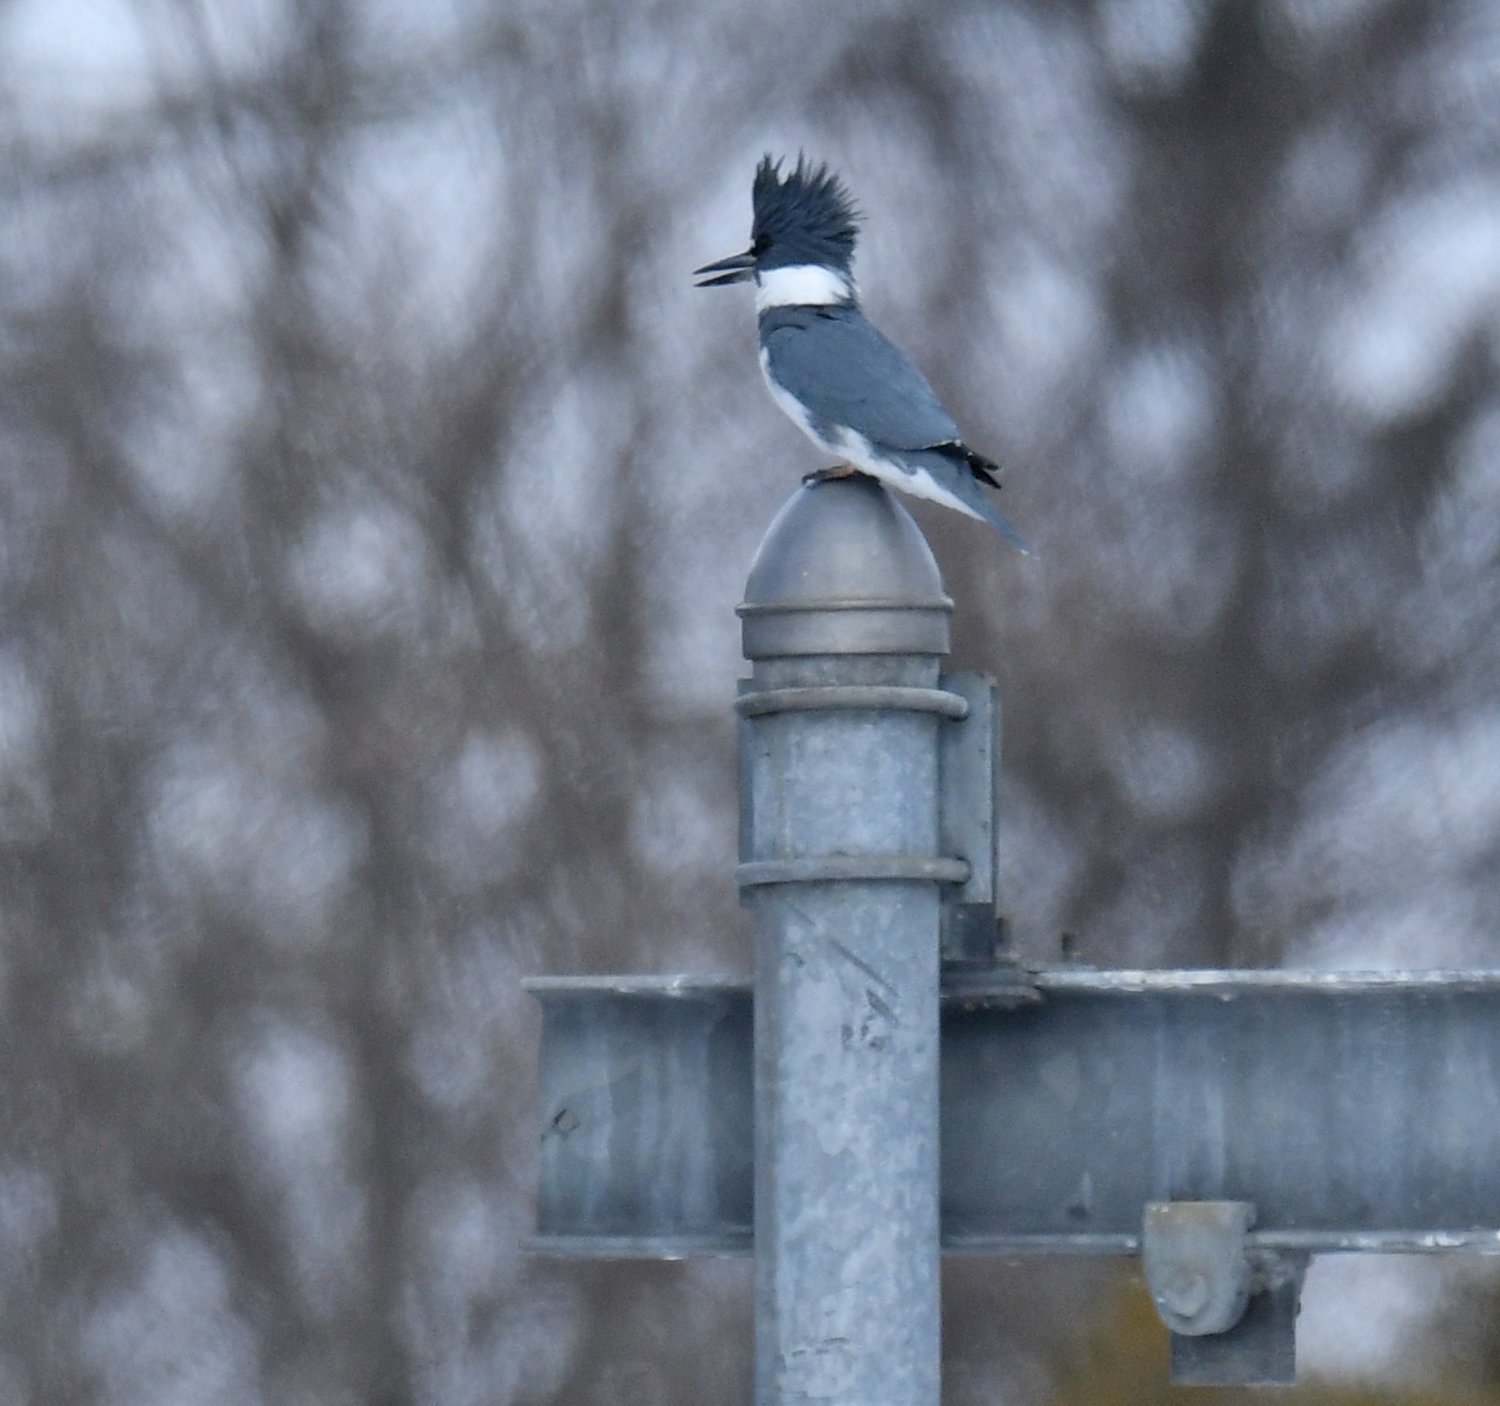 A male belted kingfisher at the Rome Fish Hatchery was part of the 123 annual Christmas Bird Count that happened around Rome and Oneida County on Sunday, Dec. 18.